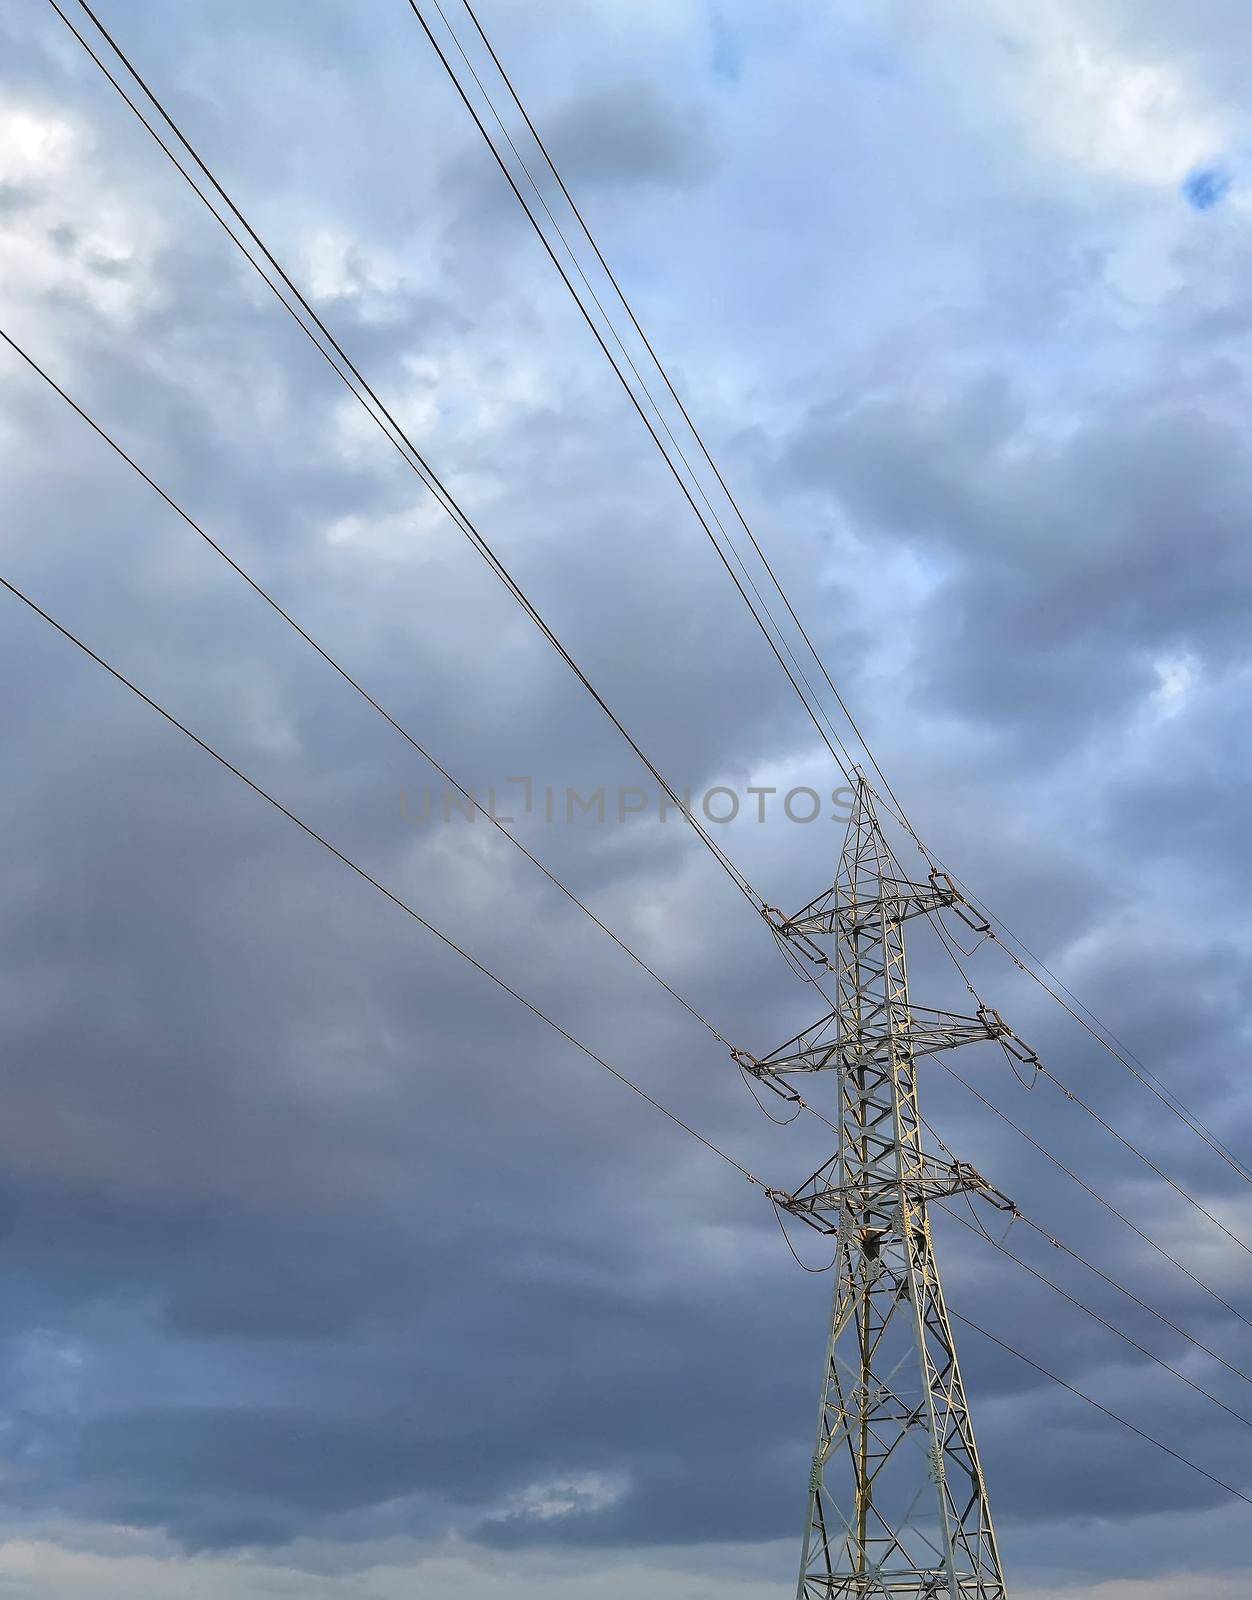 High voltage electric pole and transmission lines. Electricity pylons. Power and energy engineering system. 